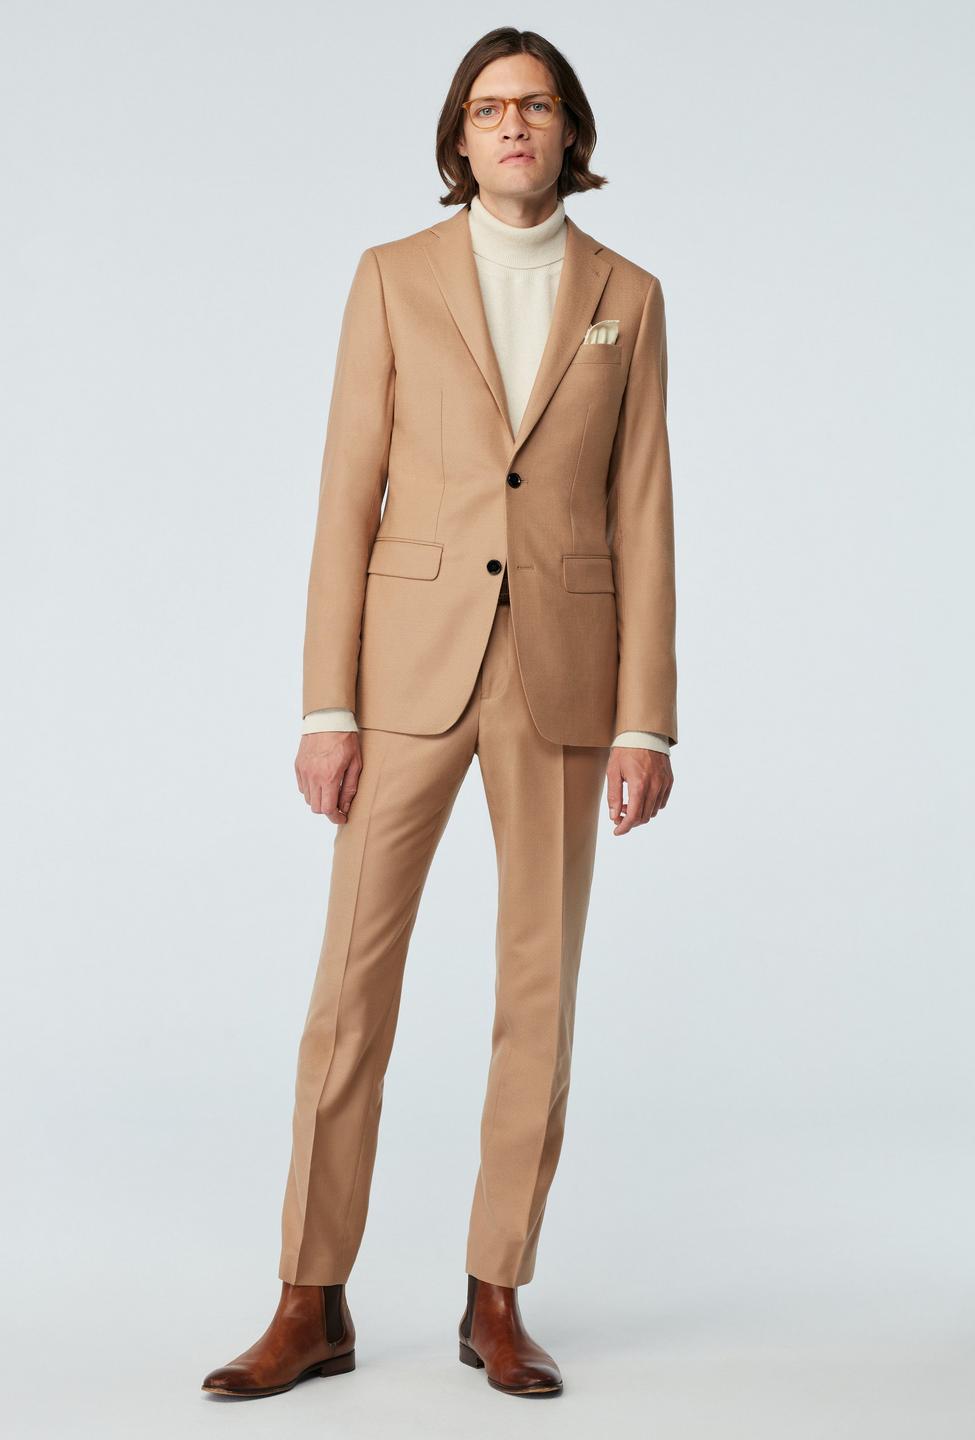 Camel suit - Monza Pattern Design from Indochino Collection